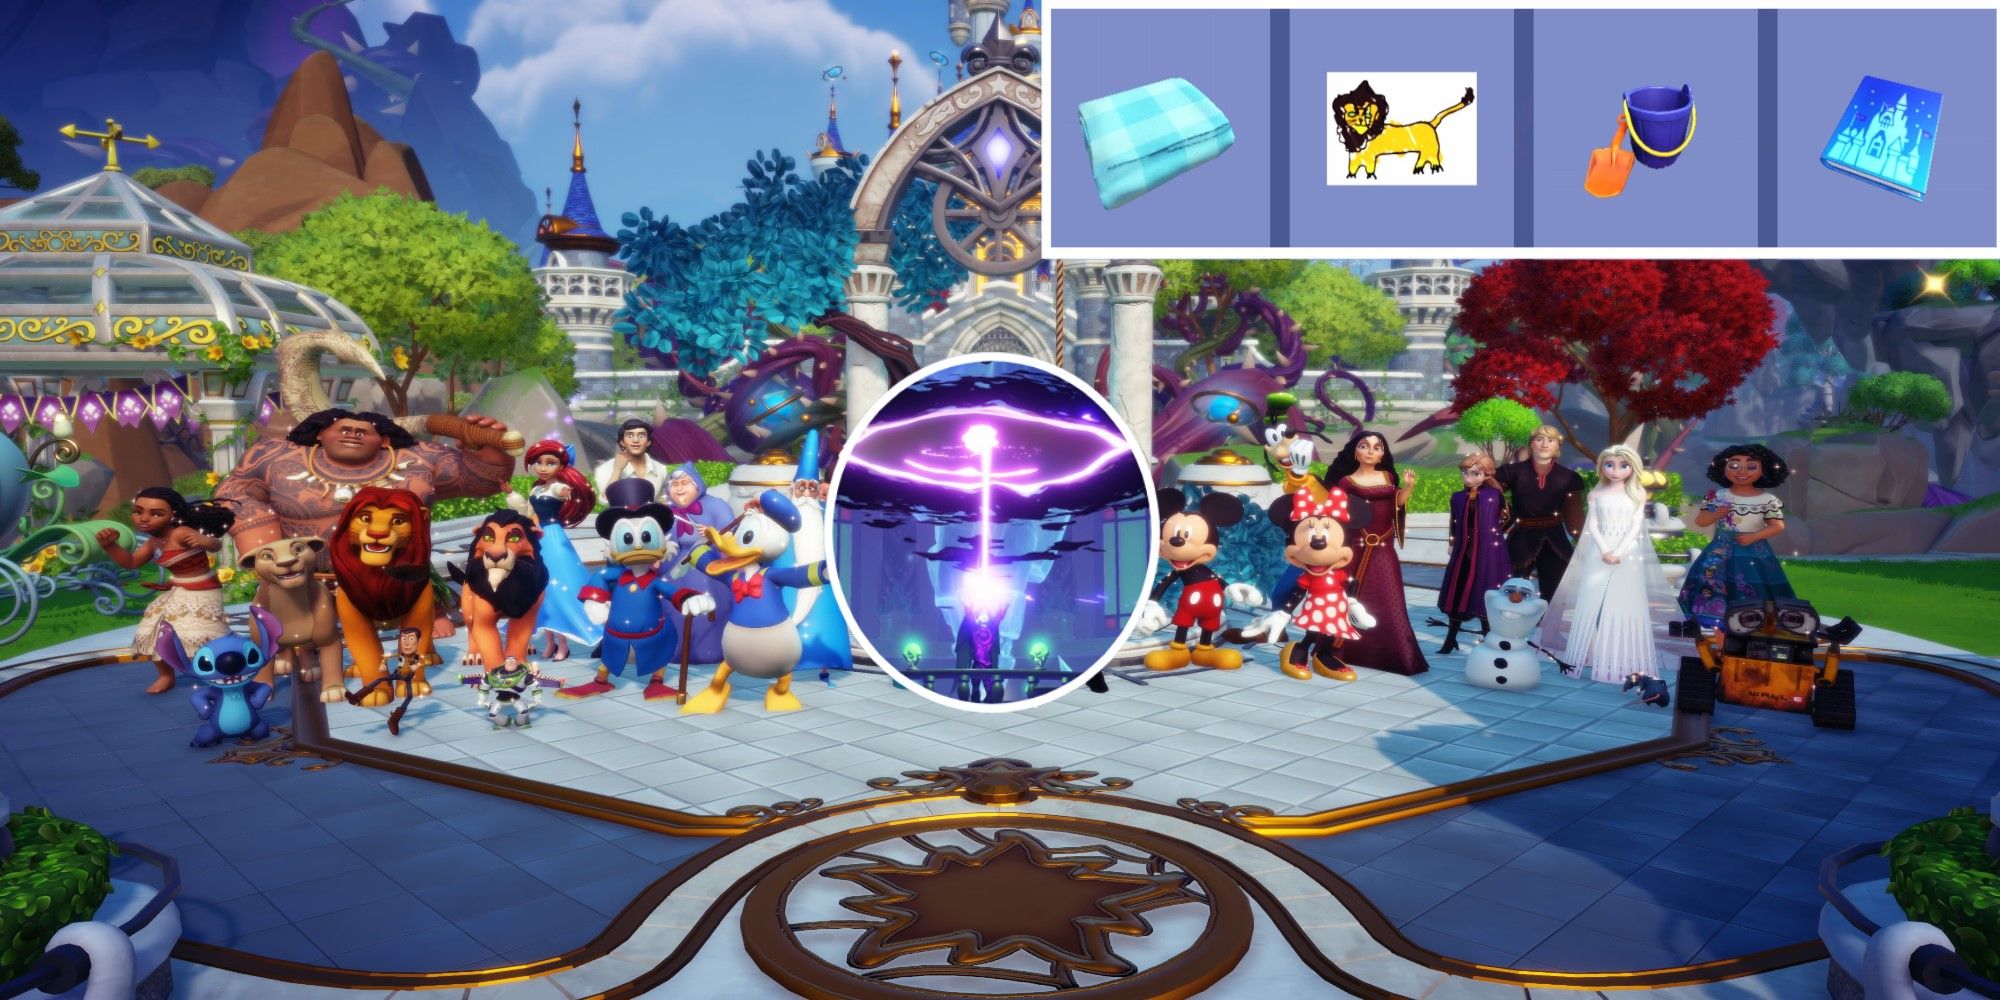 Disney Dreamlight Valley Split Image Forgotten Story End Credits Cutscene With Forgotten Relics And The Forgotten Using Dark Dream Magic At Sky